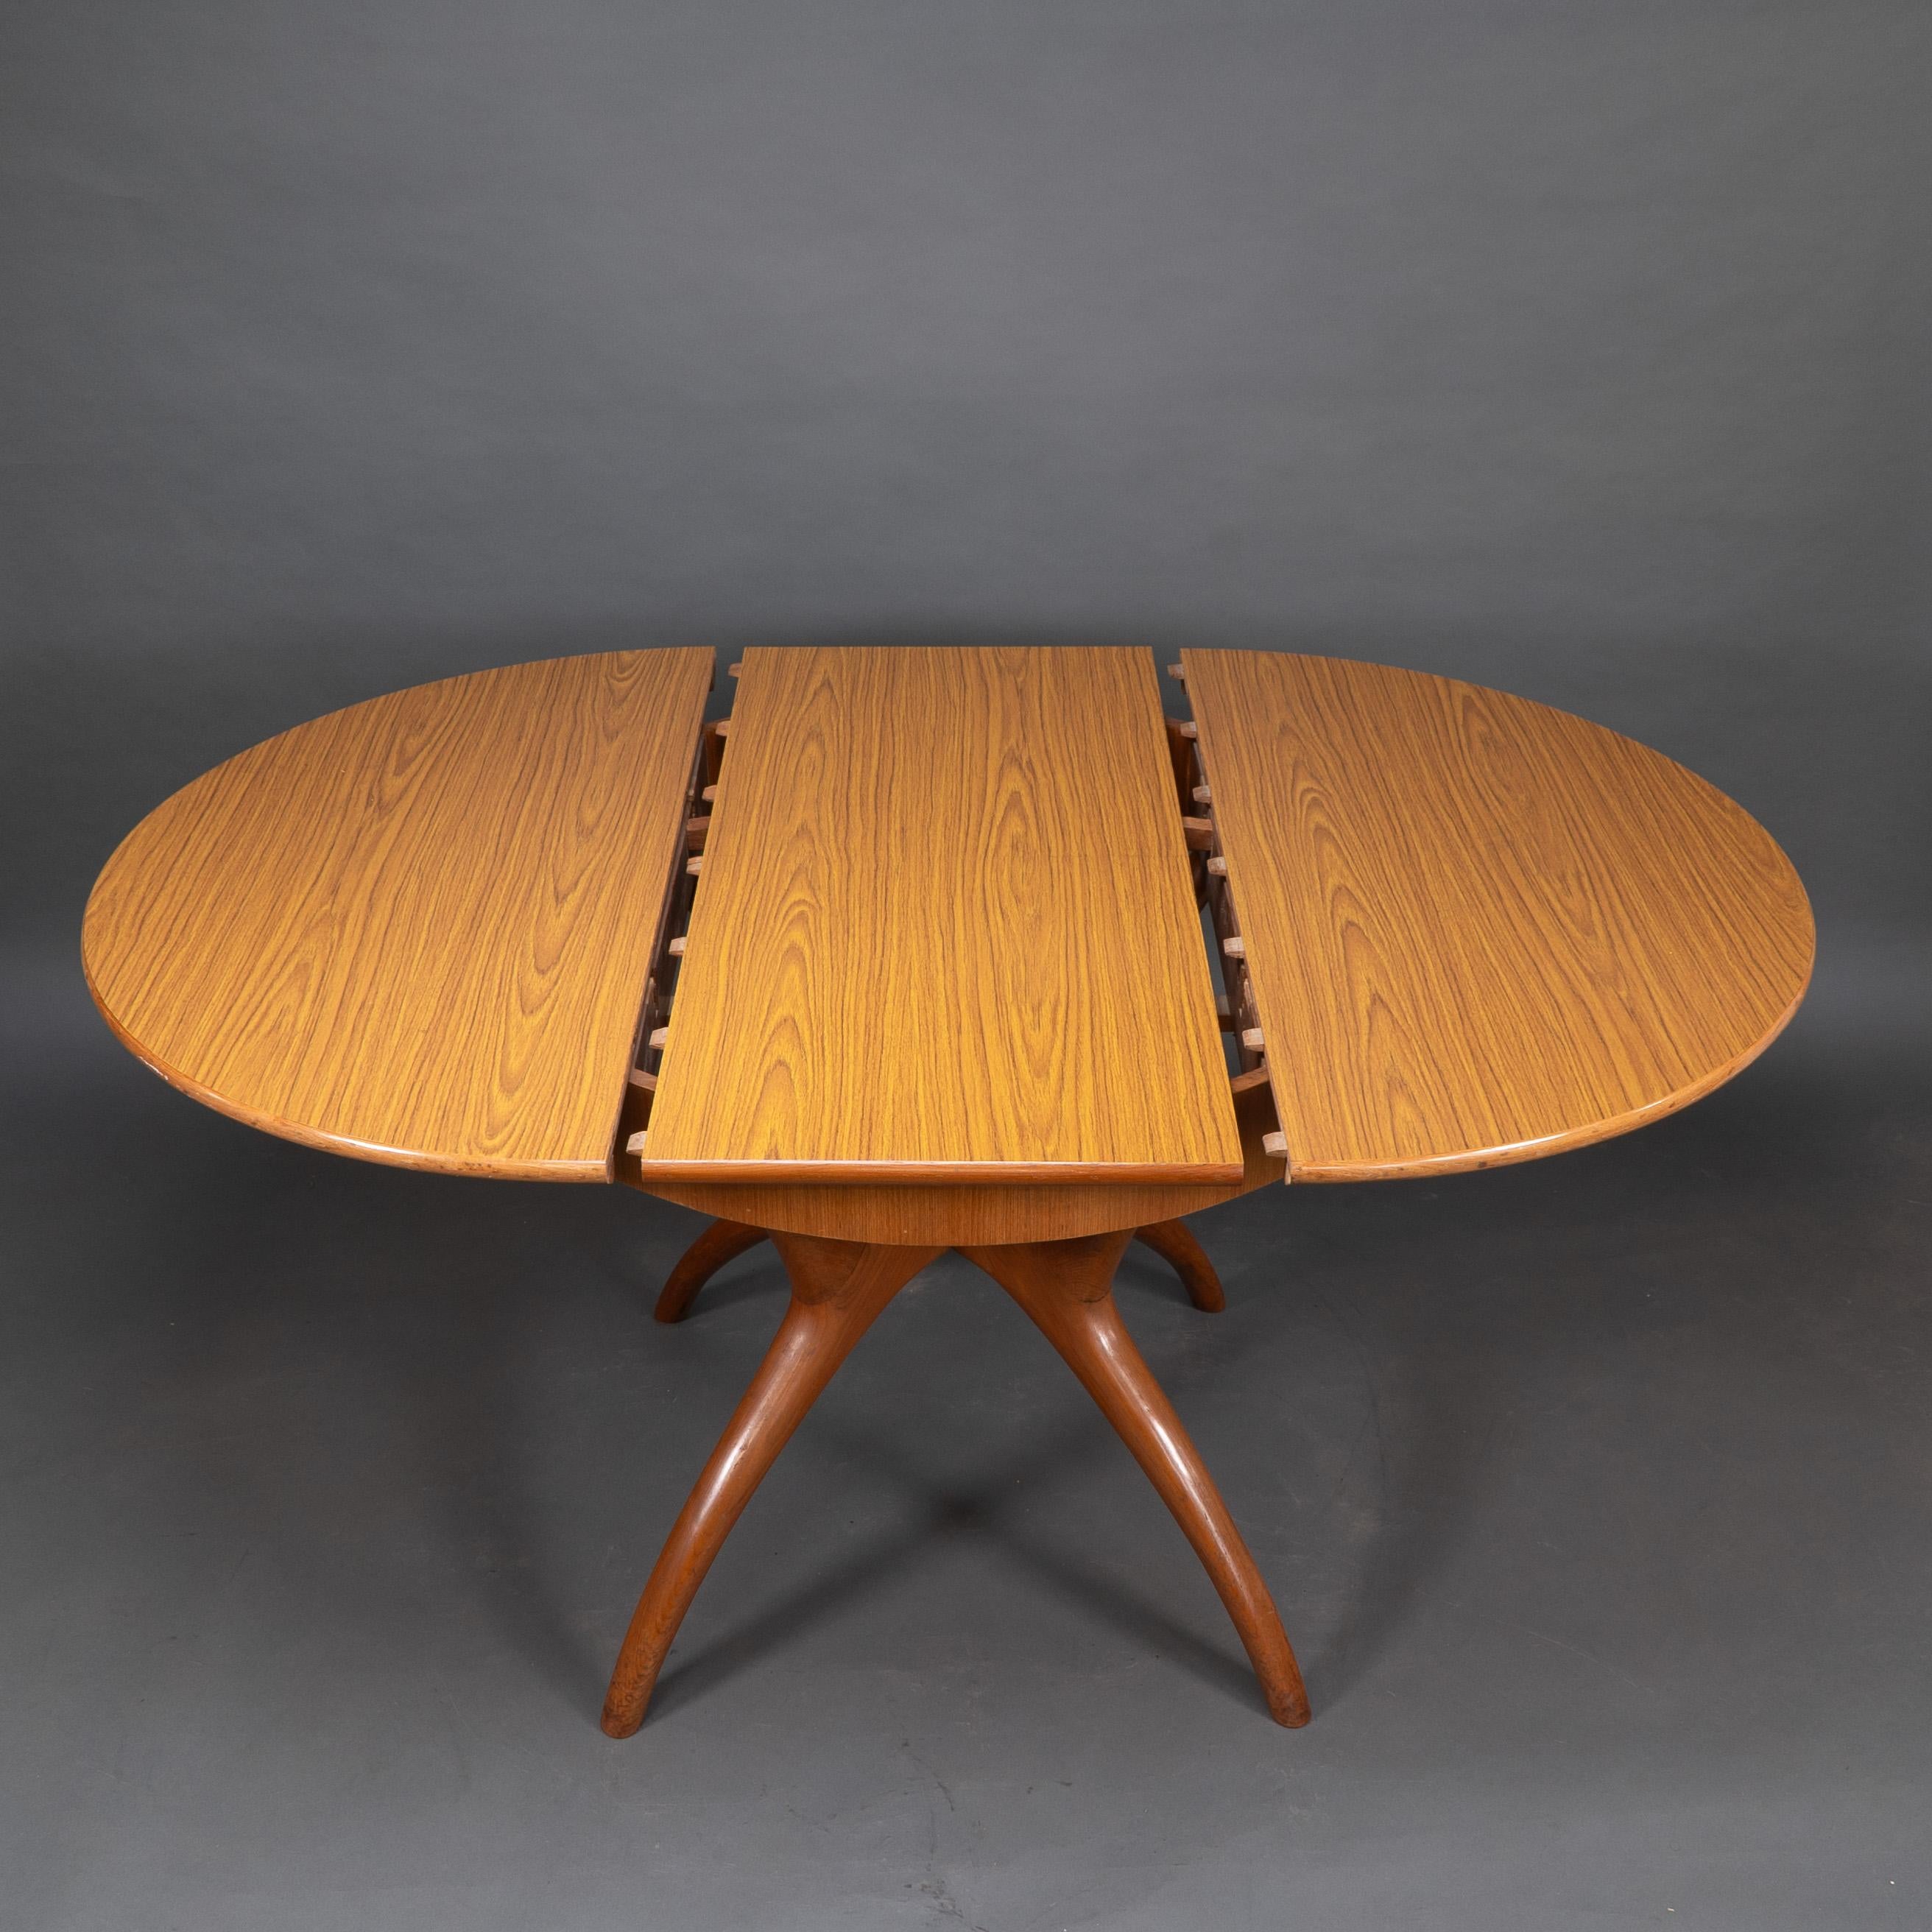 Midcentury Teak Extending Dining Table with Organic Style Cross Frame Legs For Sale 3